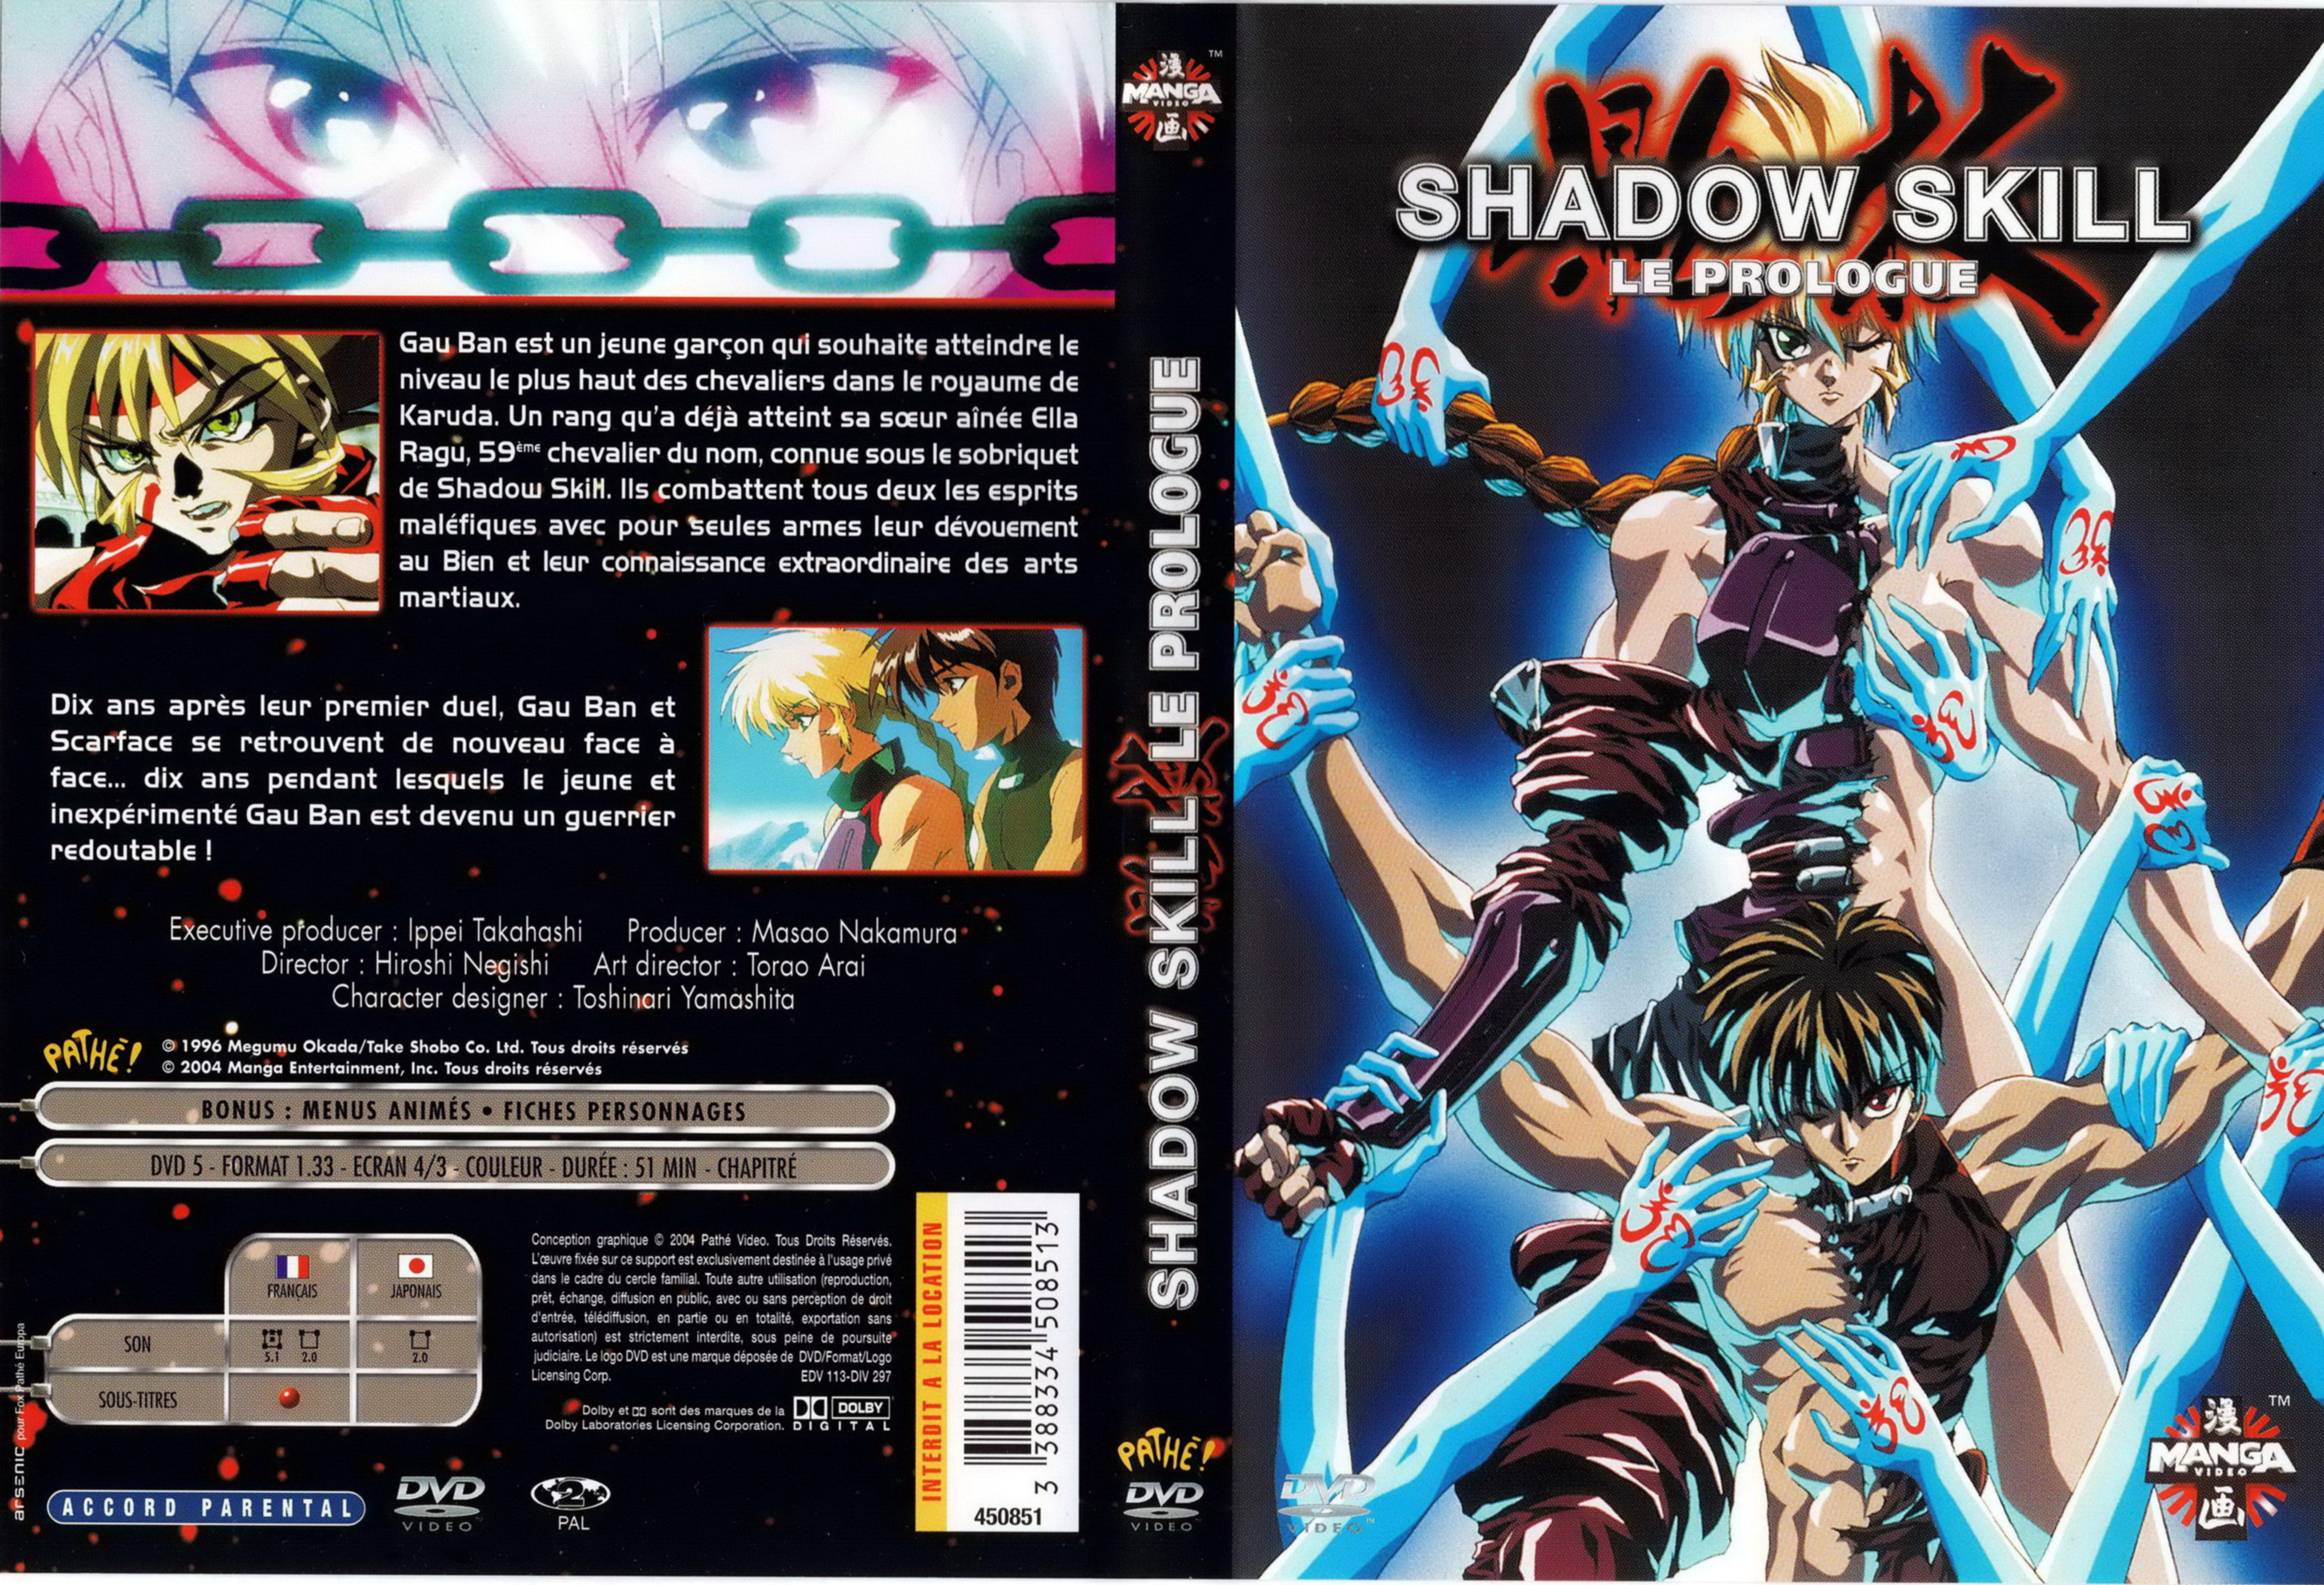 Jaquette DVD Shadow skill le prologue